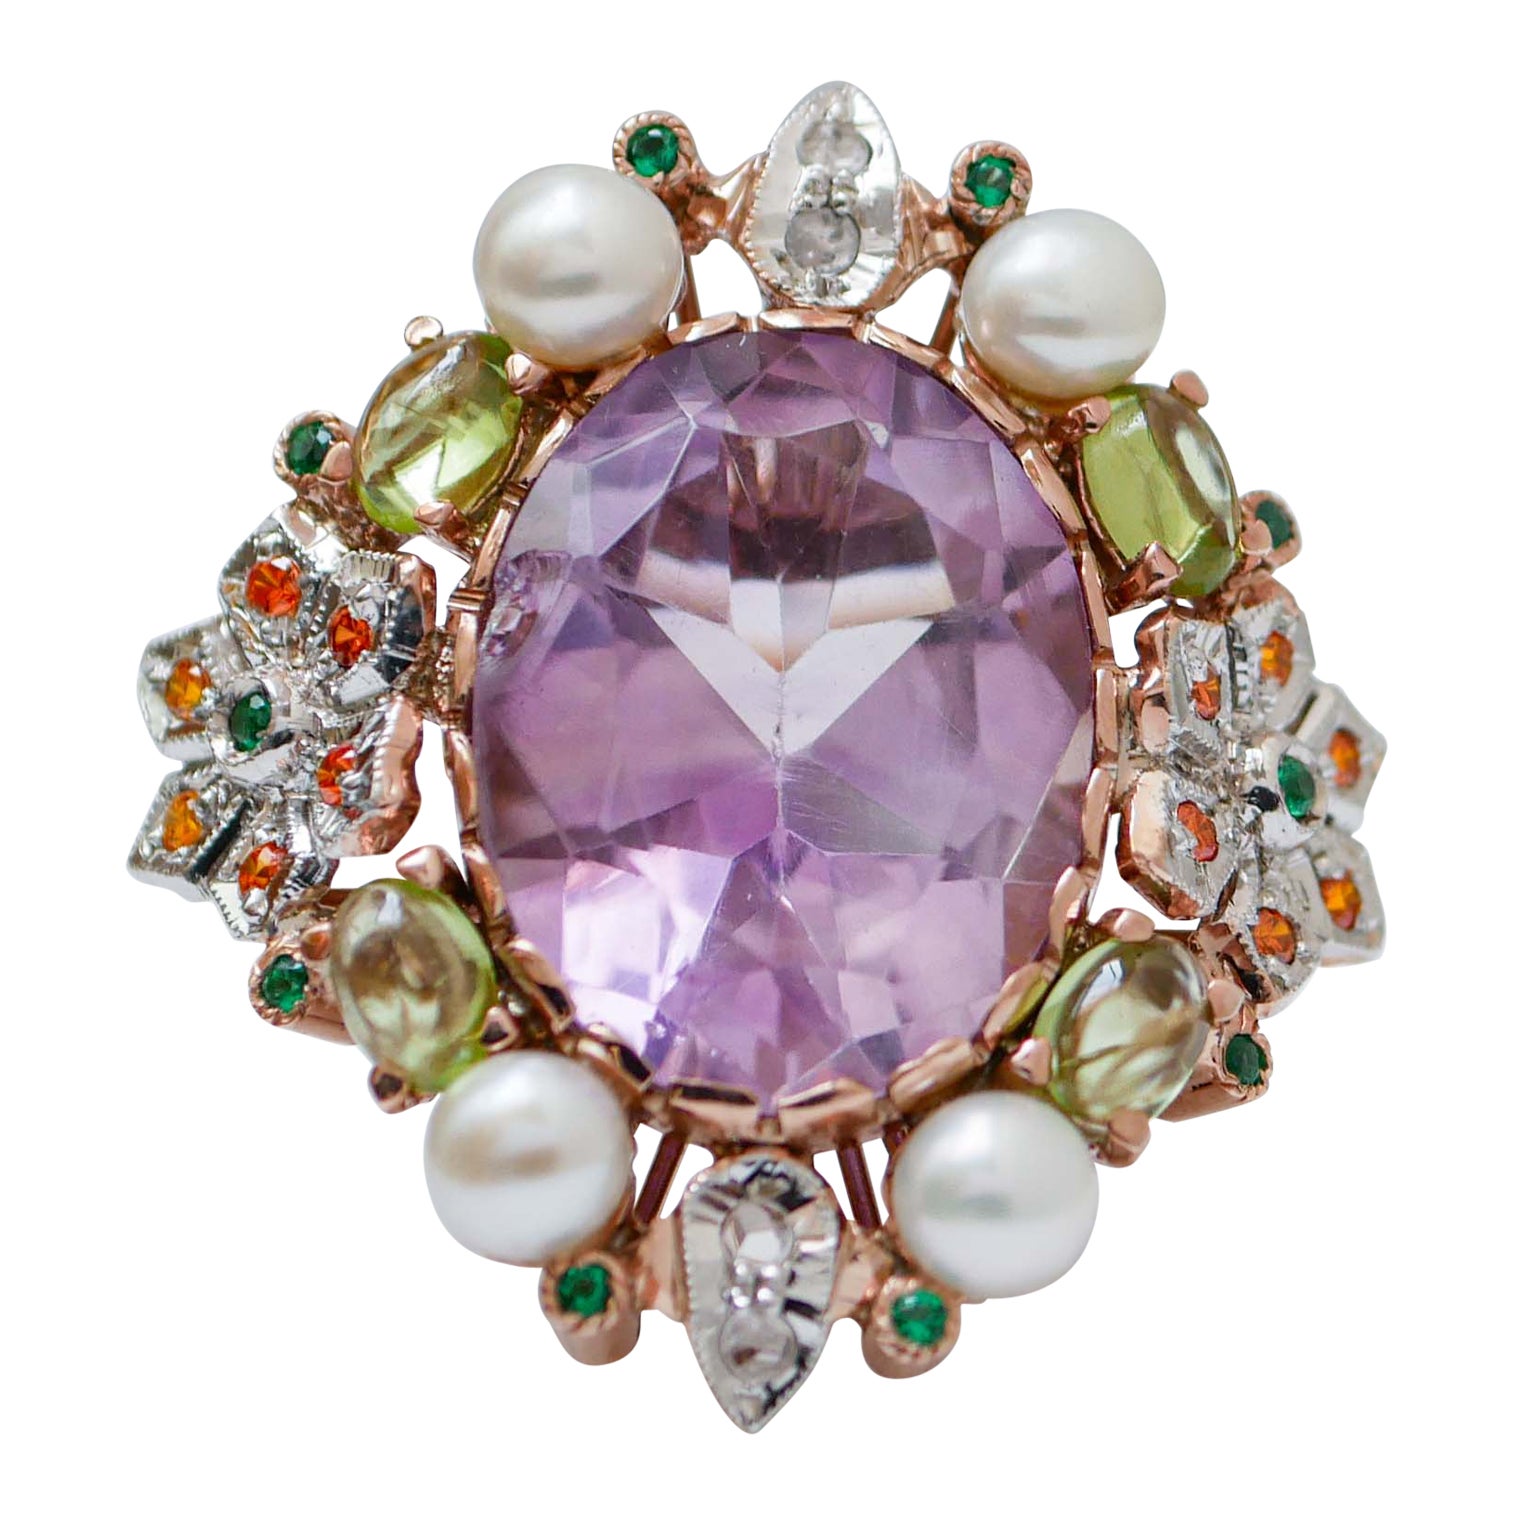 Amethyst, Peridots, Pearls, Stones,  Diamonds, Rose Gold and Silver  Ring.